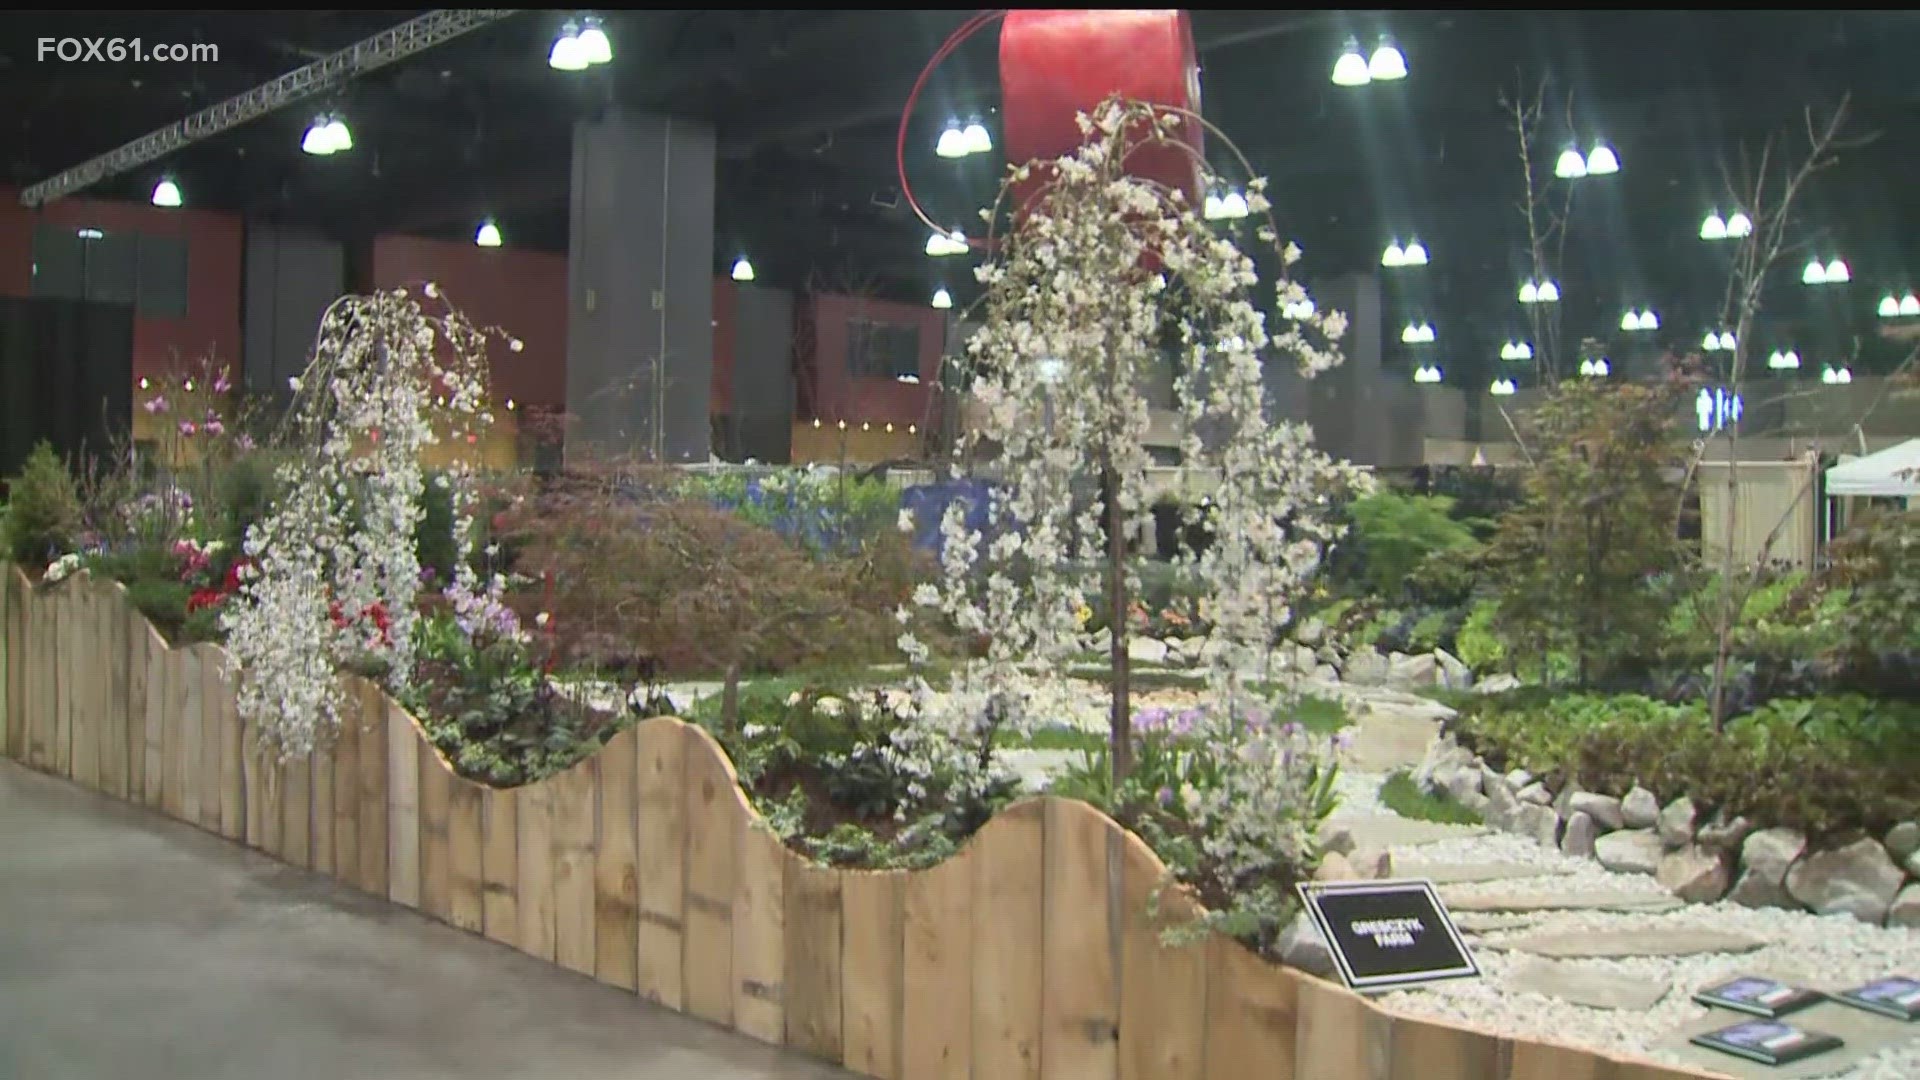 Held annually at the Connecticut Convention Center, the three-day event showcases exhibits overflowing with fresh flowers, plants, herbs, seeds and gardening books.